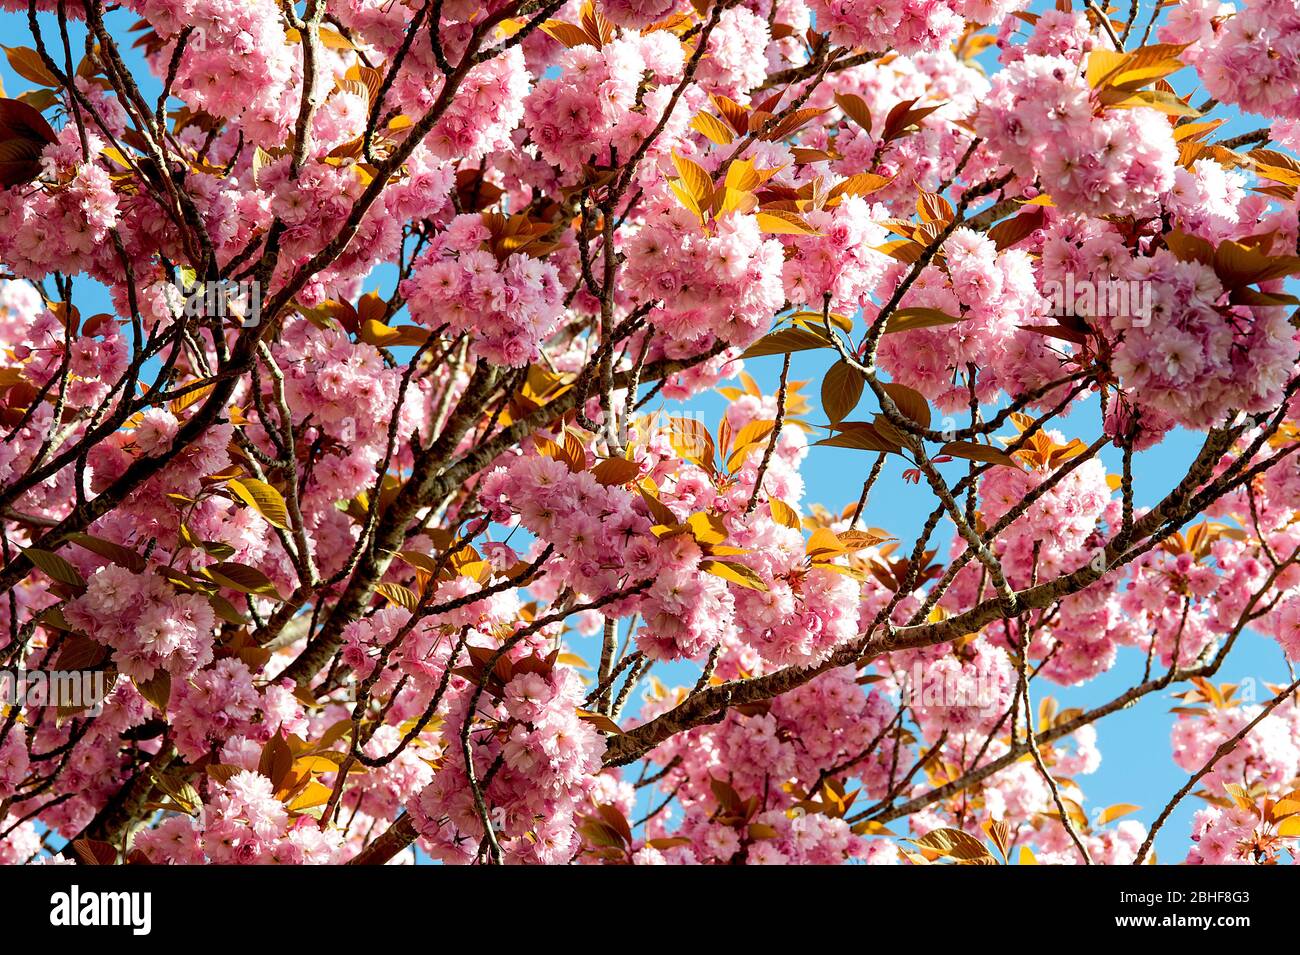 Pink peach blossoms in Hove Park, England Stock Photo